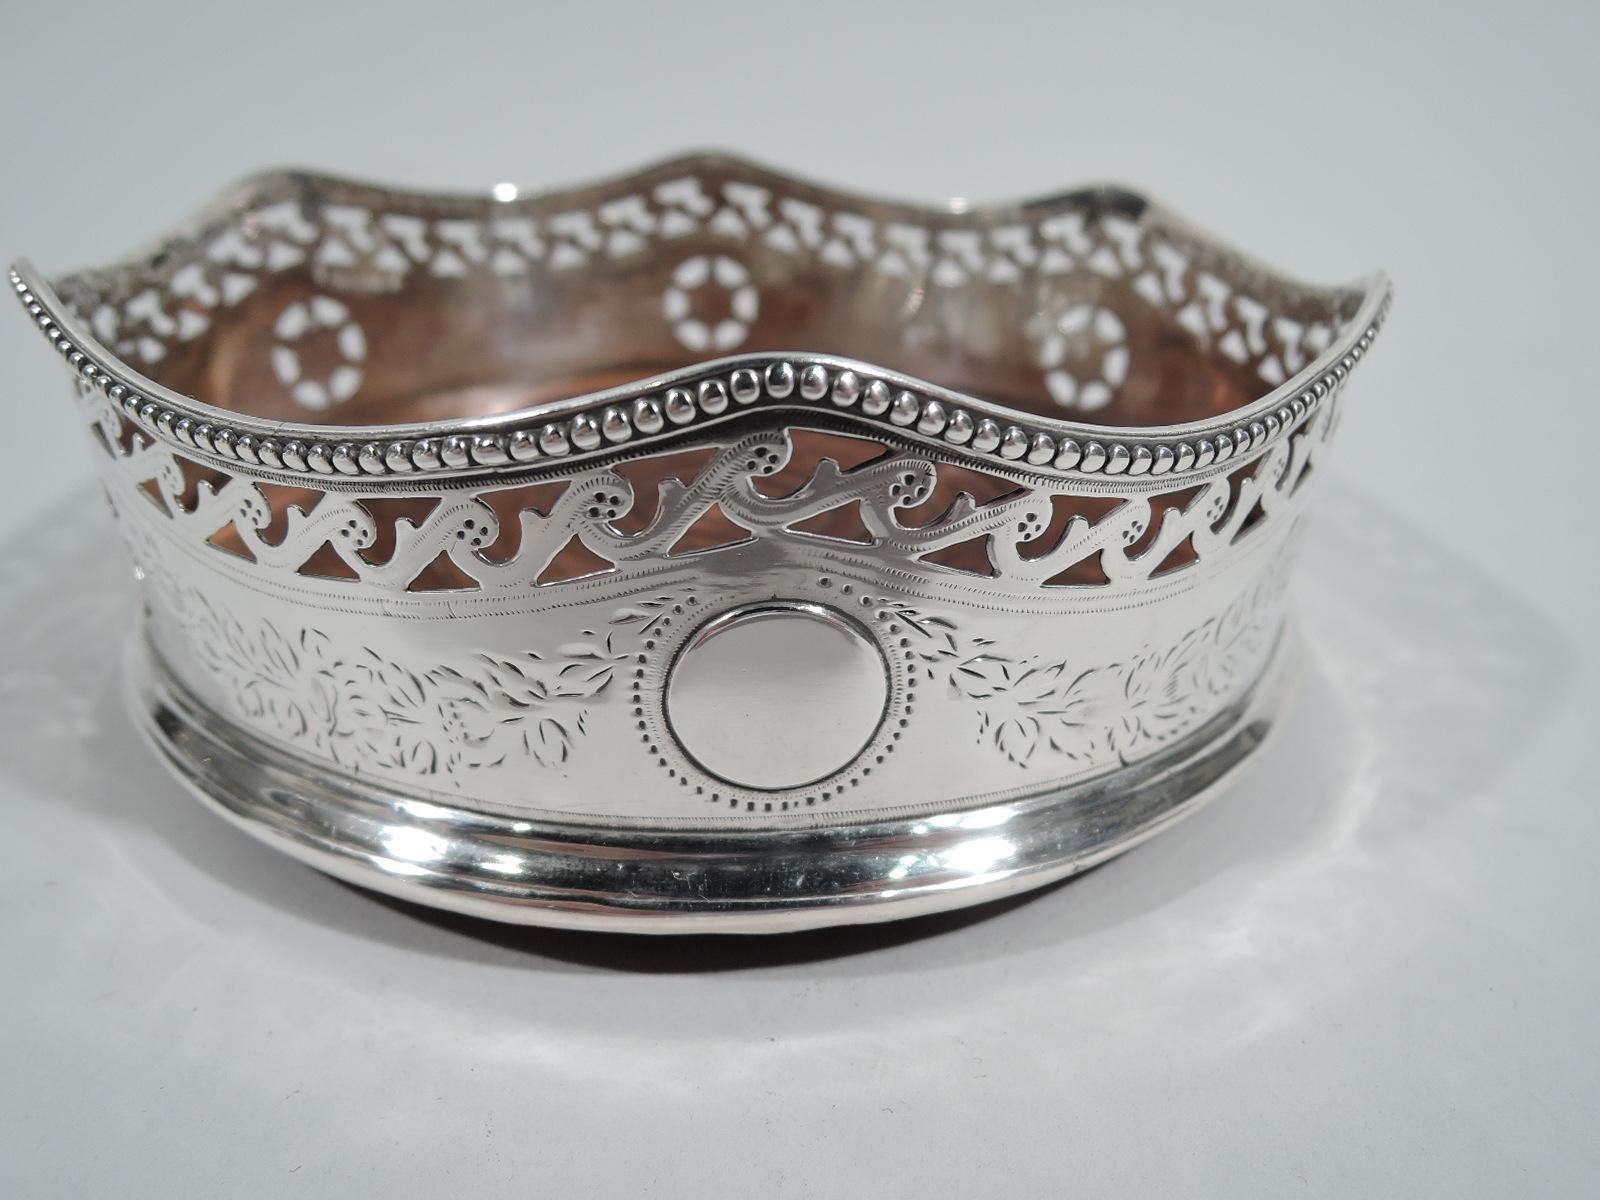 English Georgian sterling silver wine coaster, 1814. Engraved garland alternating with pierced paterae; single solid round frame (vacant). Wavy beaded rim and pierced Vitruvian scroll border. Stained-wood base and felt-lined underside. A